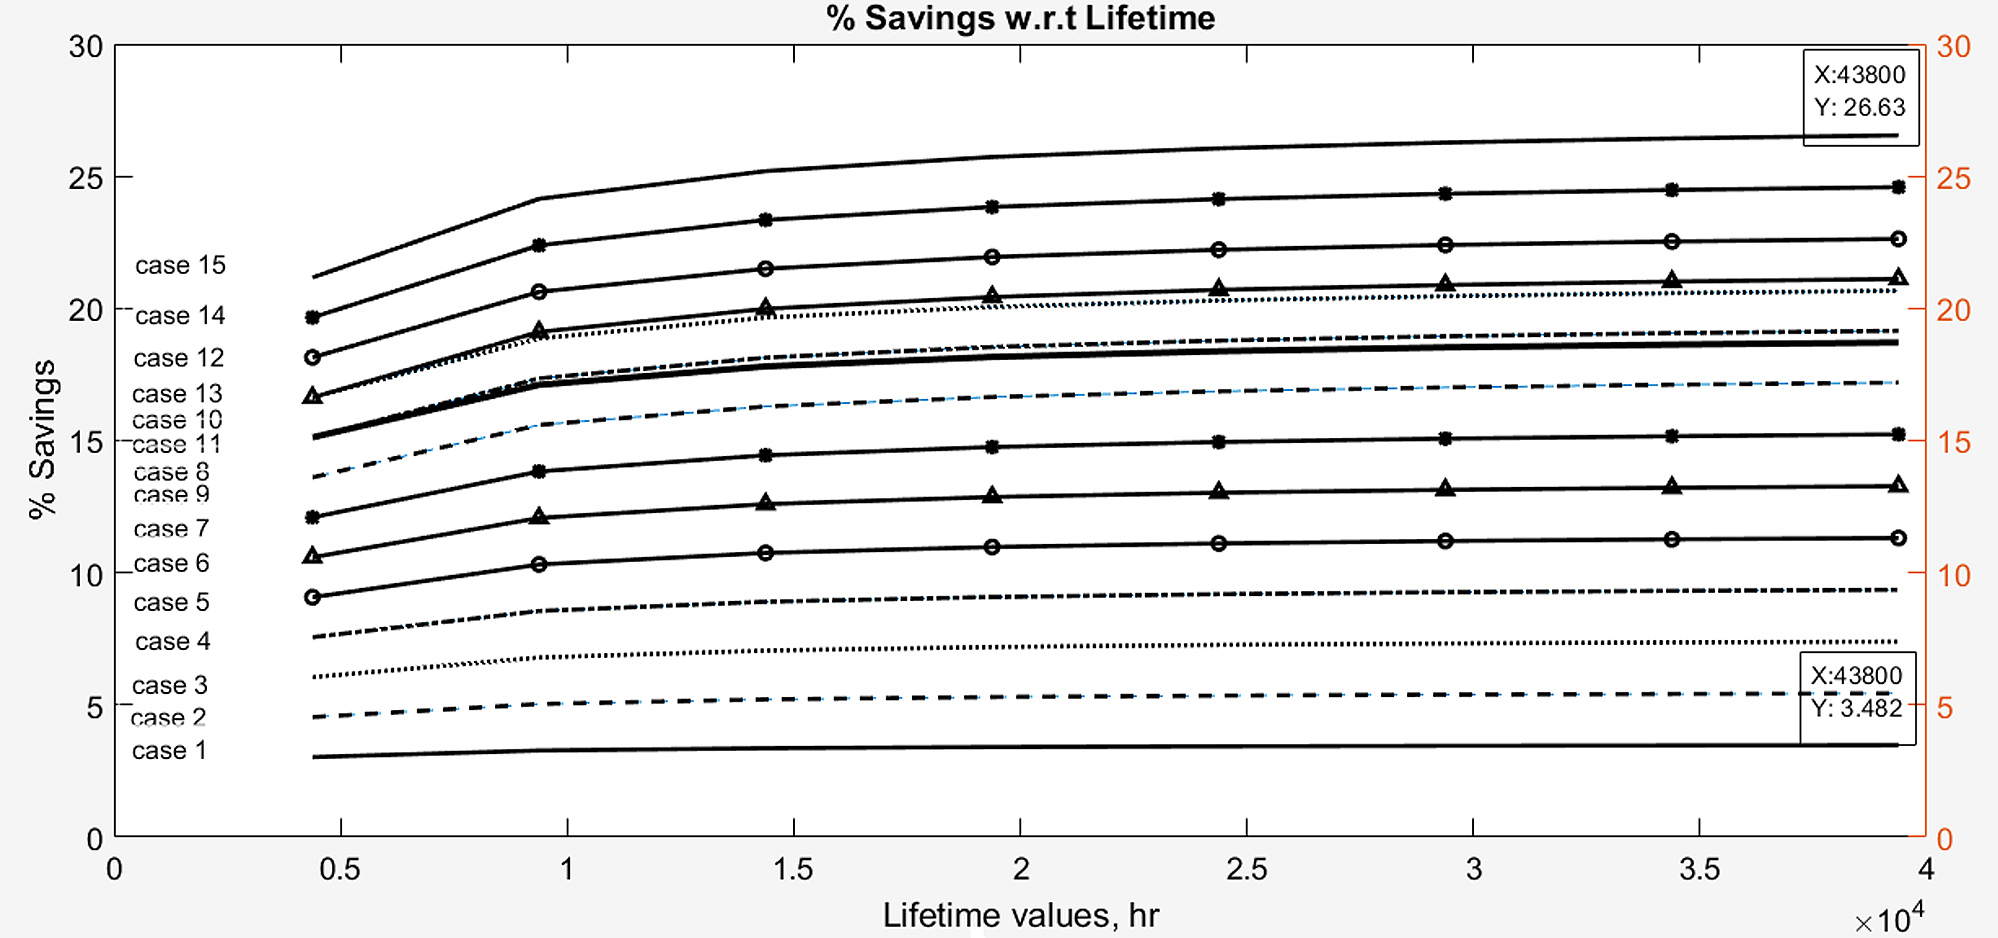 The percentages saving increased by the extending light source lifetimes (from 4380 up to 43800 h for TC light sources).